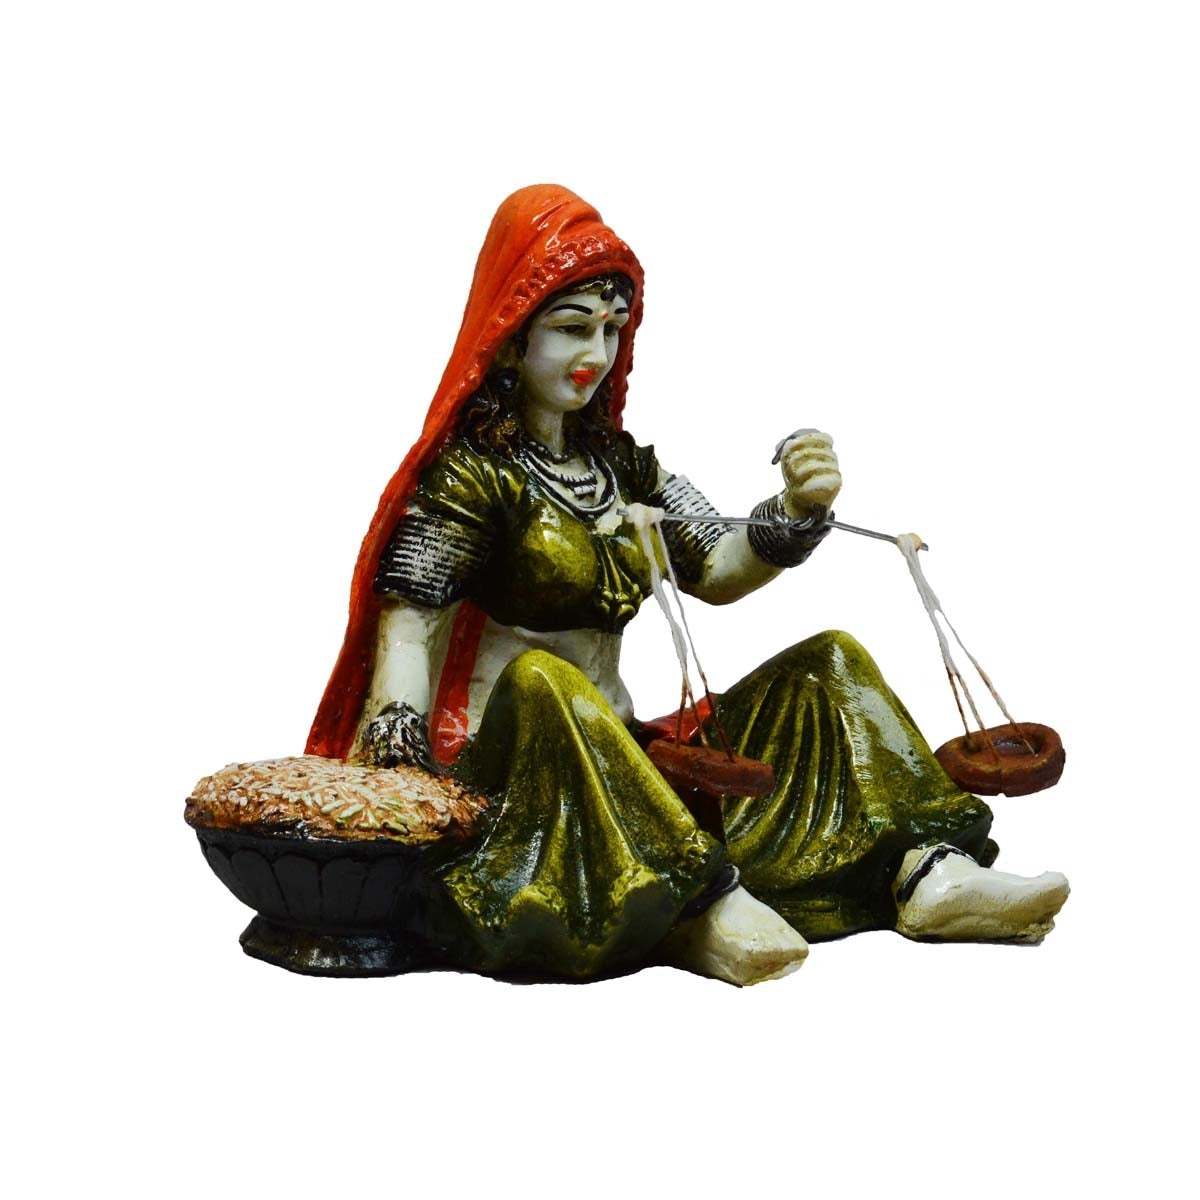 Polyresin Rajasthani Lady Statue with Weighing Scale Handcrafted Decorative Showpiece(Orange and Green)